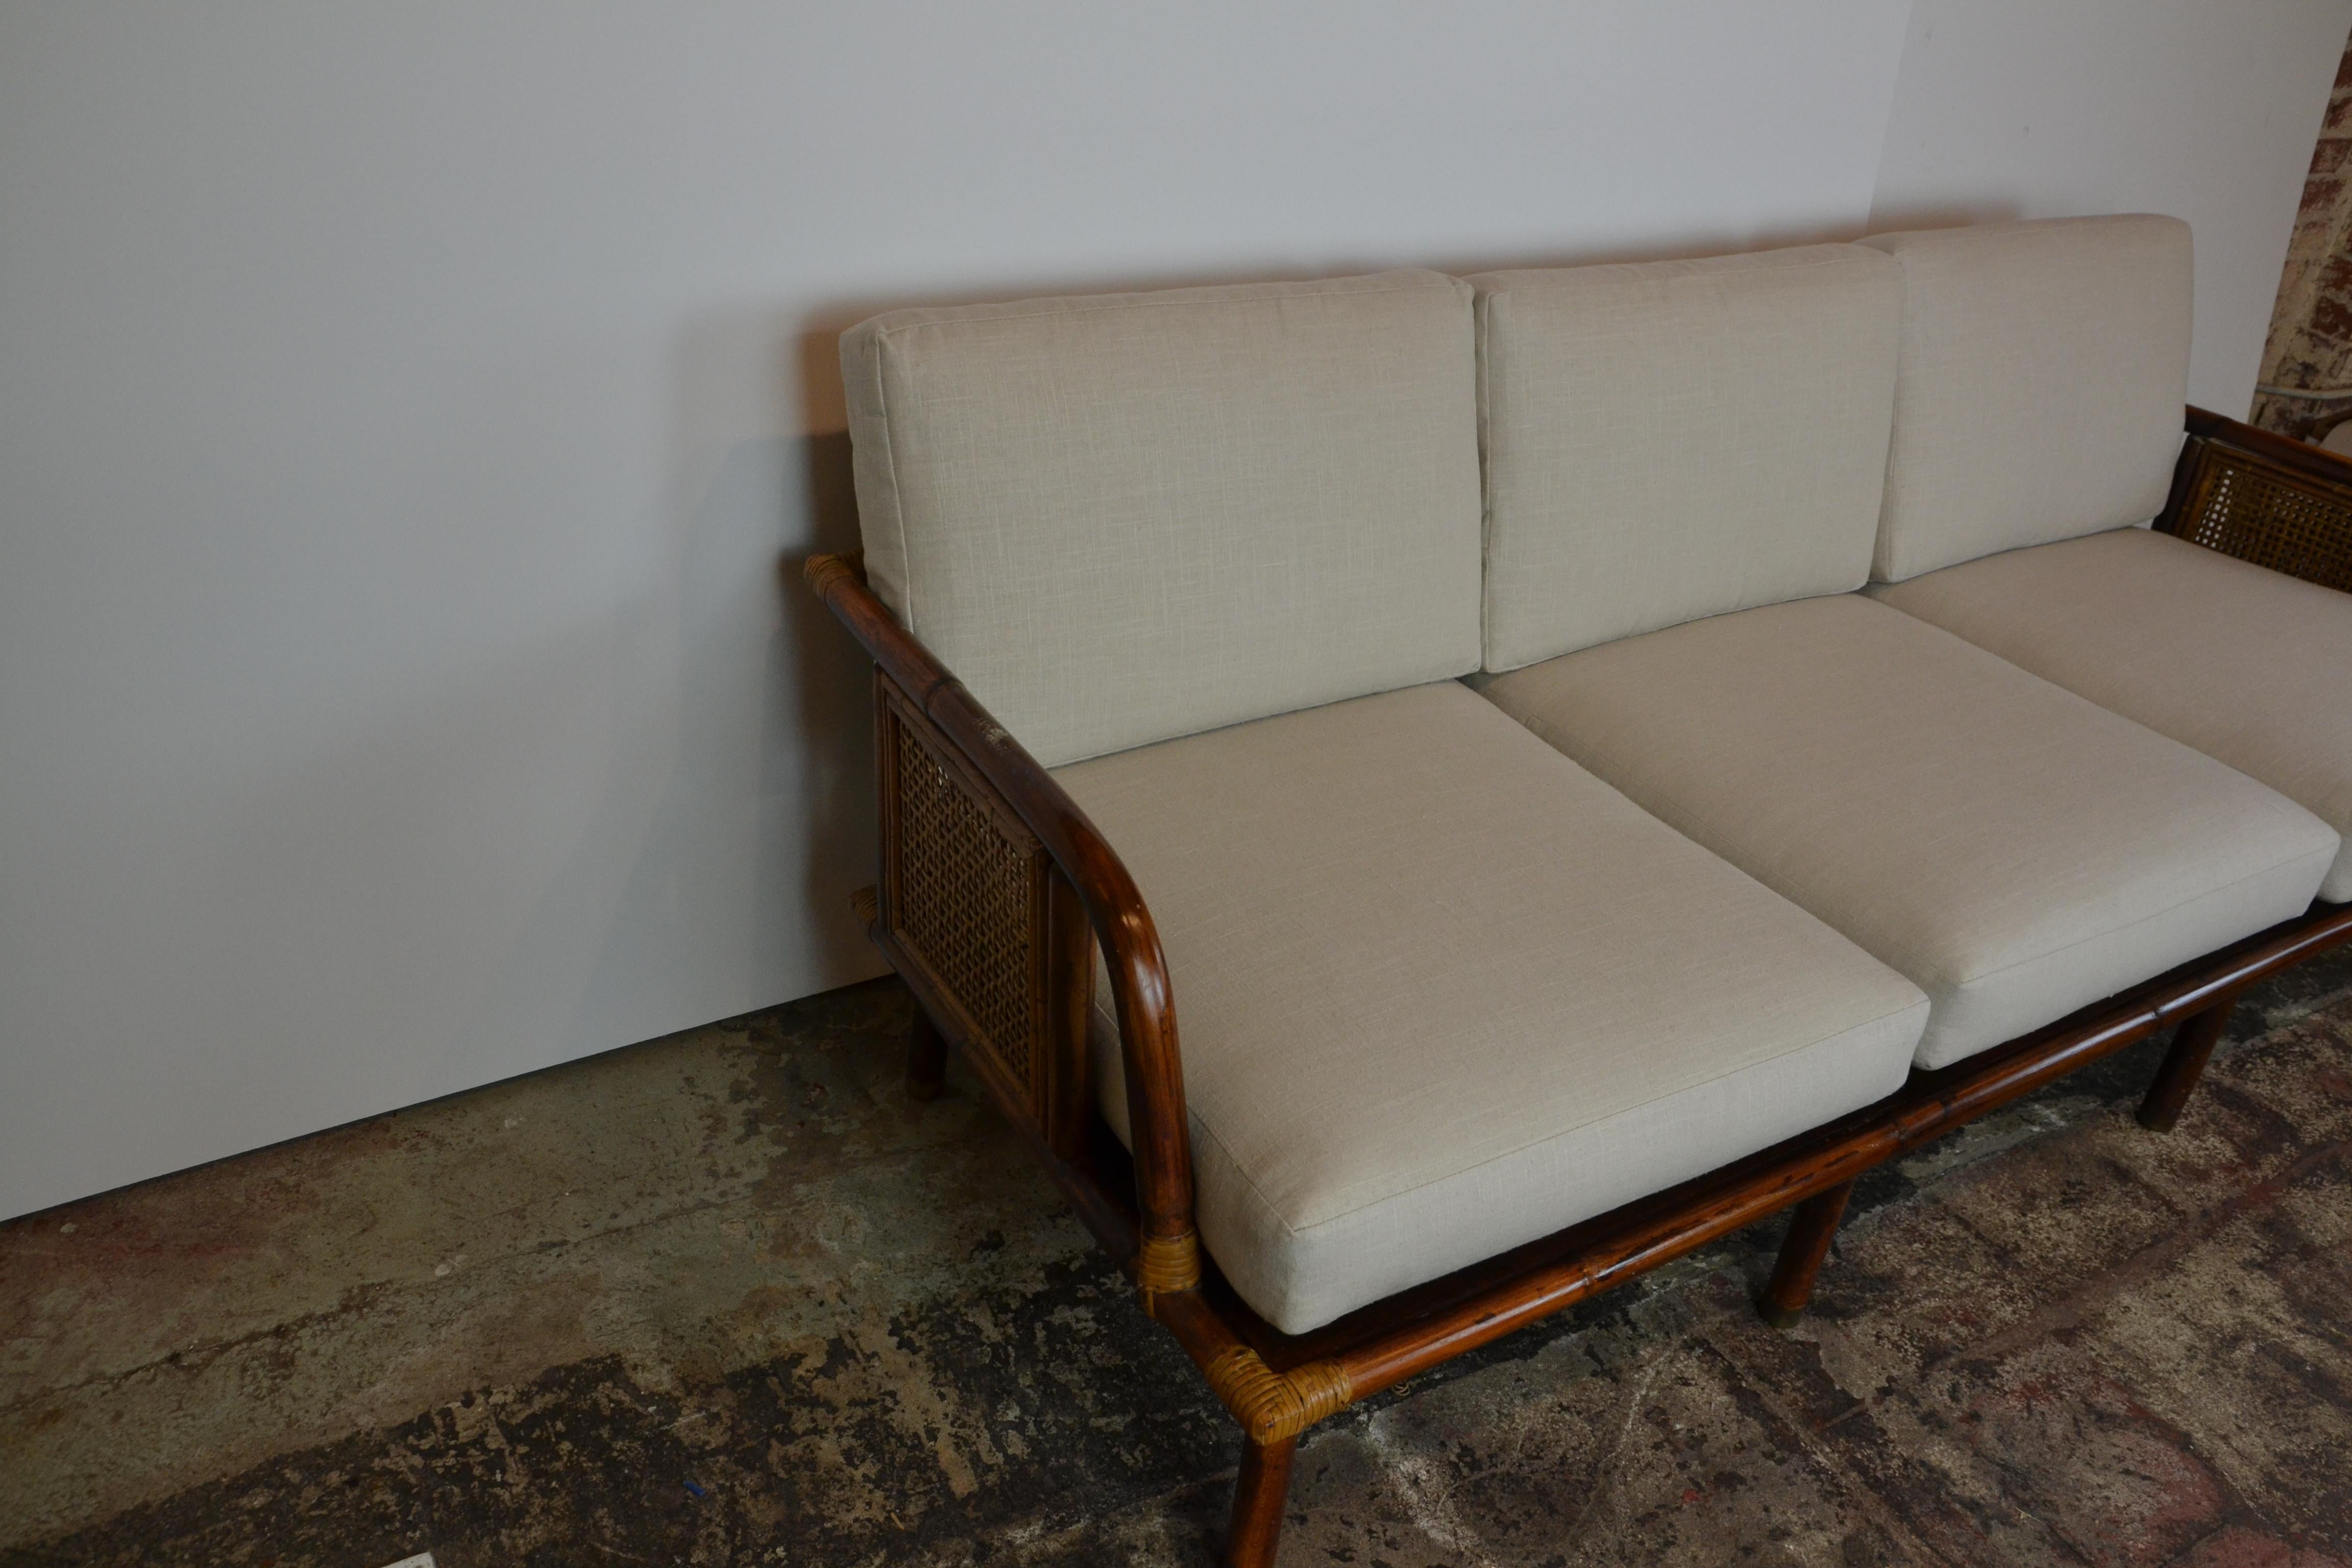 A beautiful 3-seat modern rattan and cane sofa from a limited series by Ficks Reed Company, circa 1950. Expertly crafted hardwood and rattan construction with cane panel detail. A fabulous design that is extremely comfortable. Newly upholstered in a